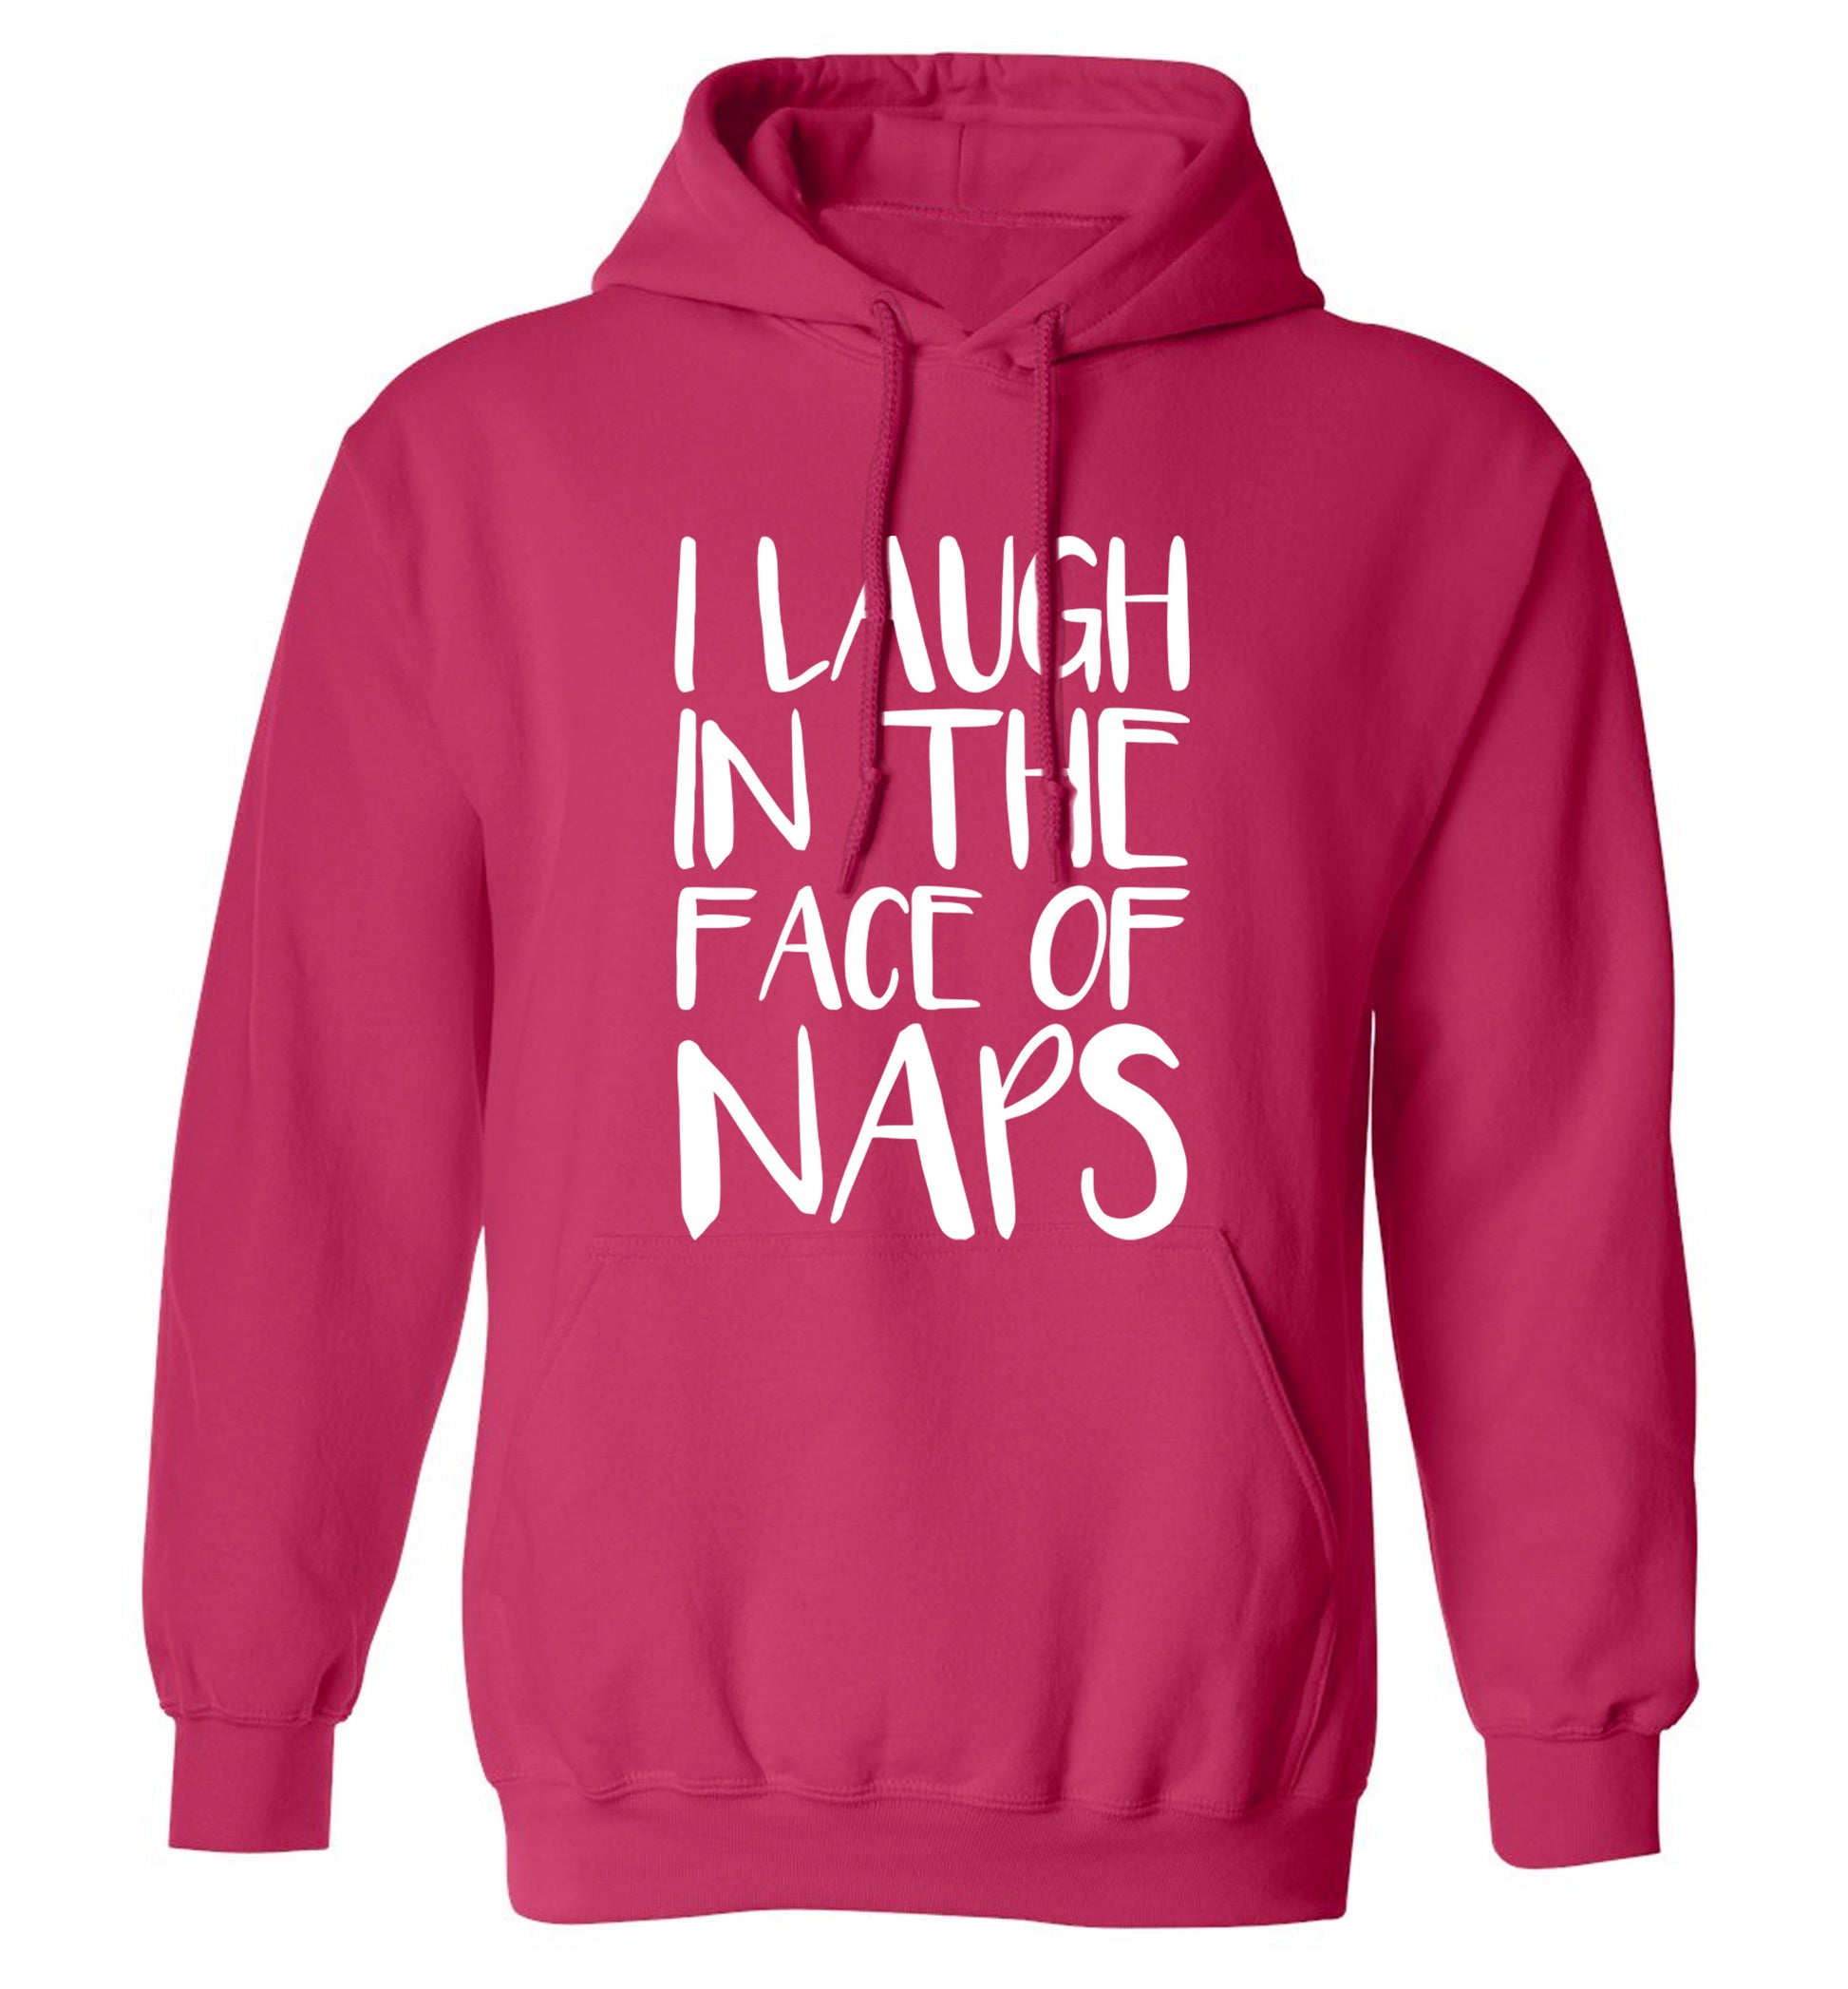 I laugh in the face of naps adults unisex pink hoodie 2XL